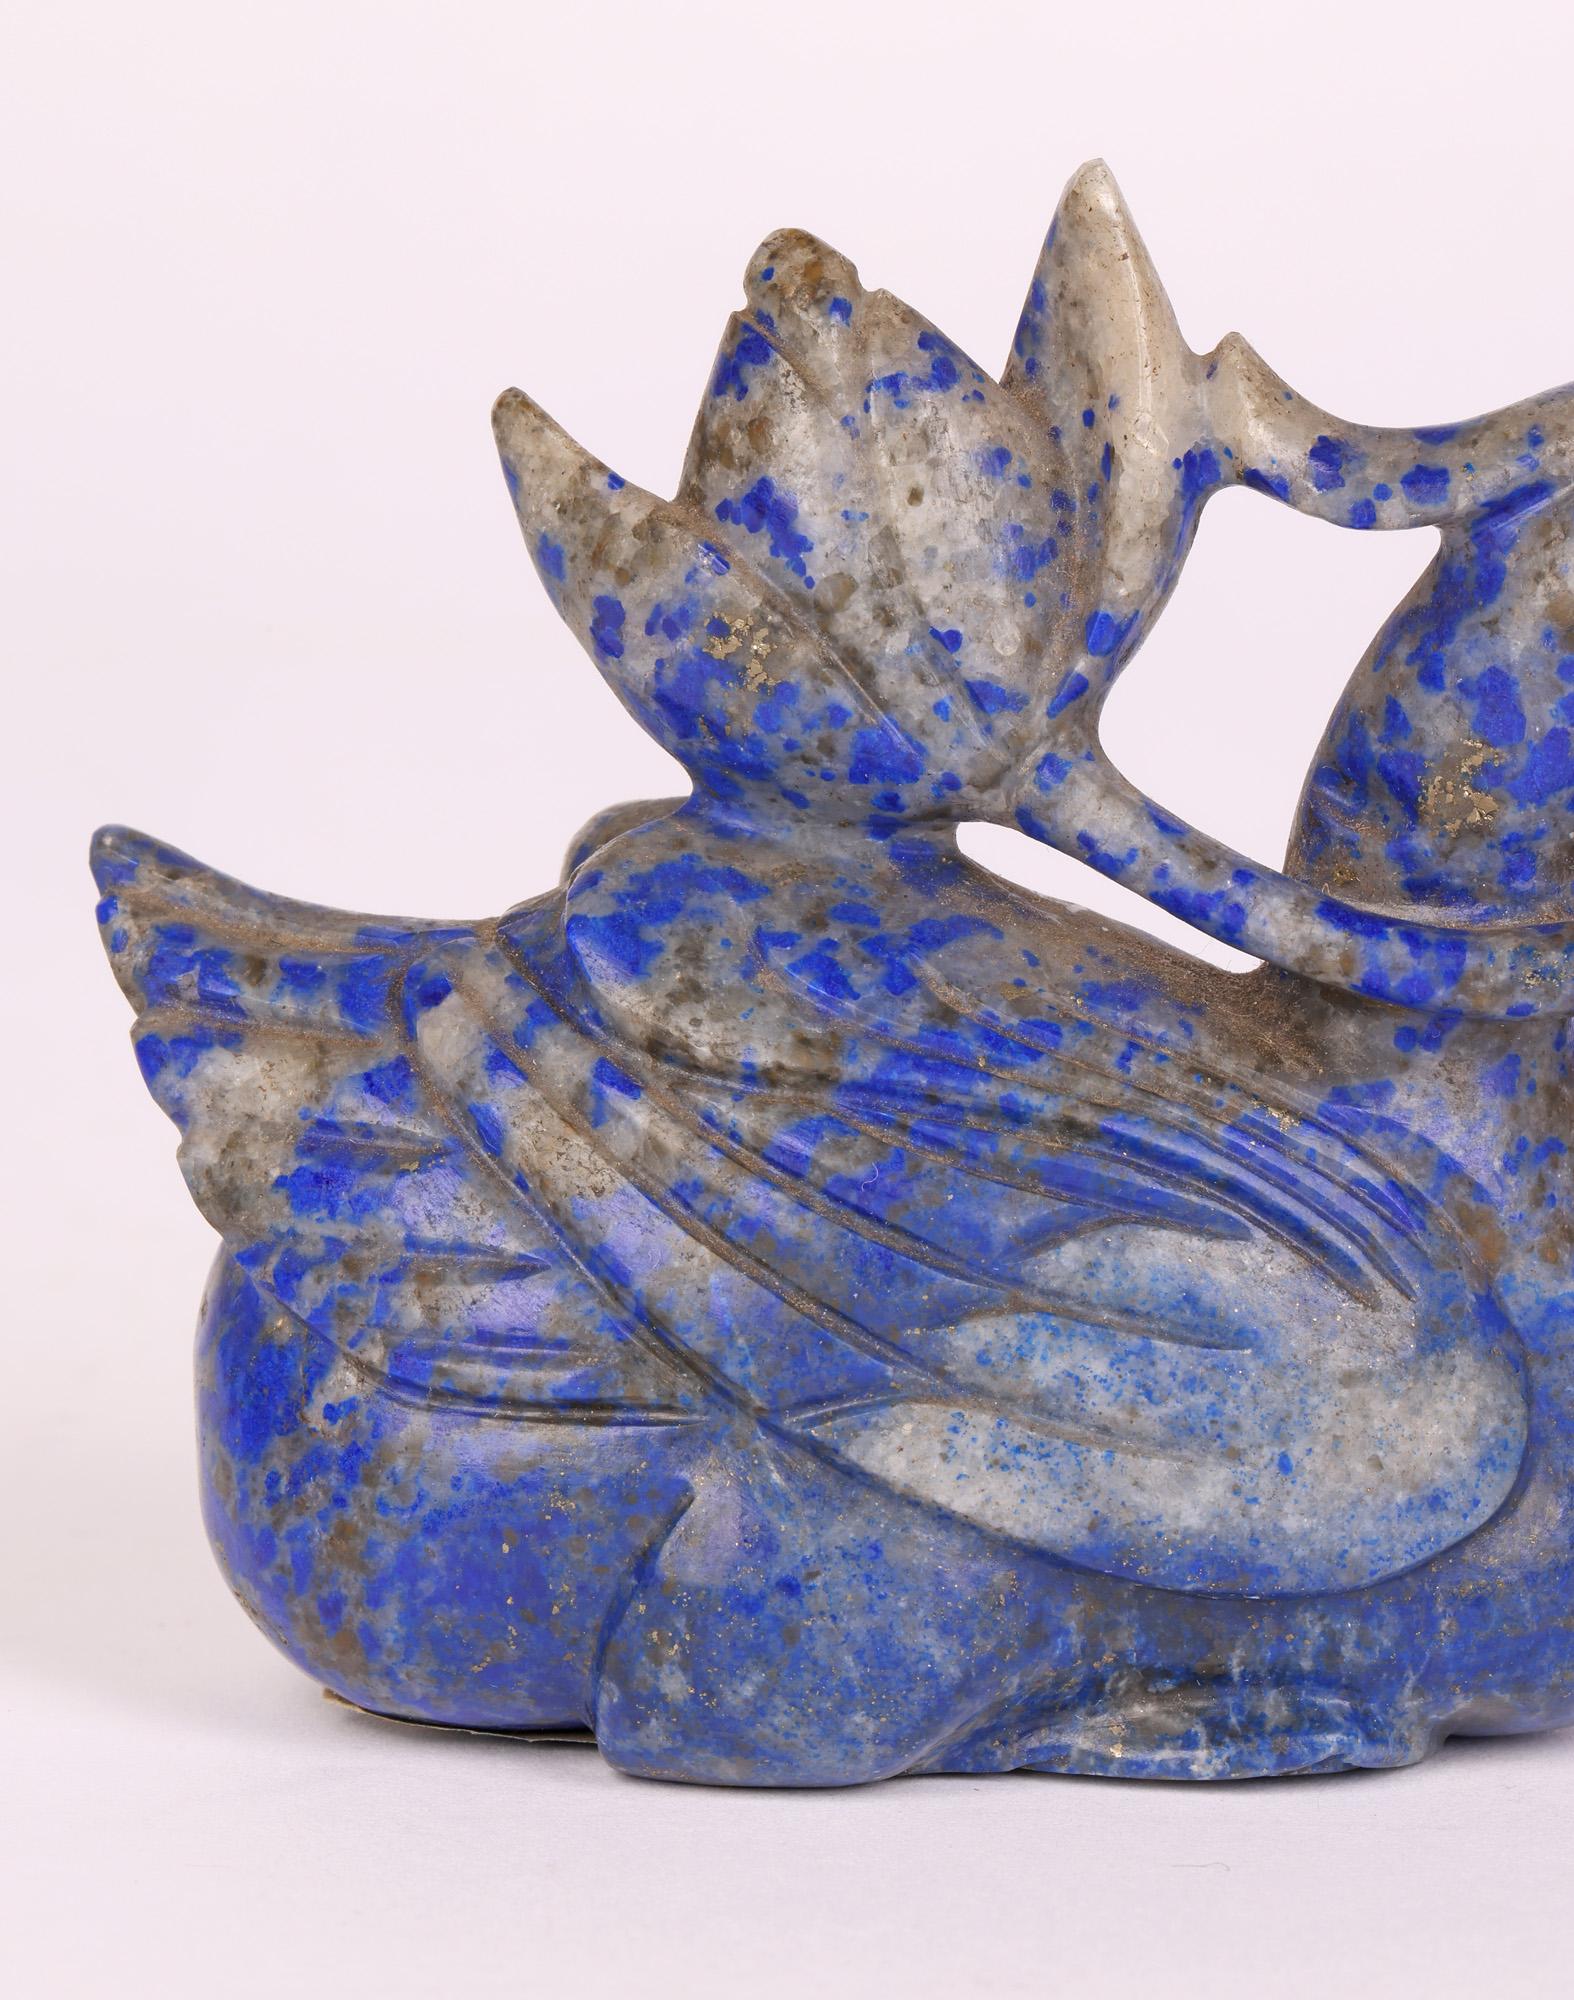 A well carved Chinese Lapis Lazuli figure of a duck with a Lotus flower probably dating from the latter 19th or early 20th century. The figure is hand carved and well detailed with the duck in a crouched (possibly swimming) position and holding a